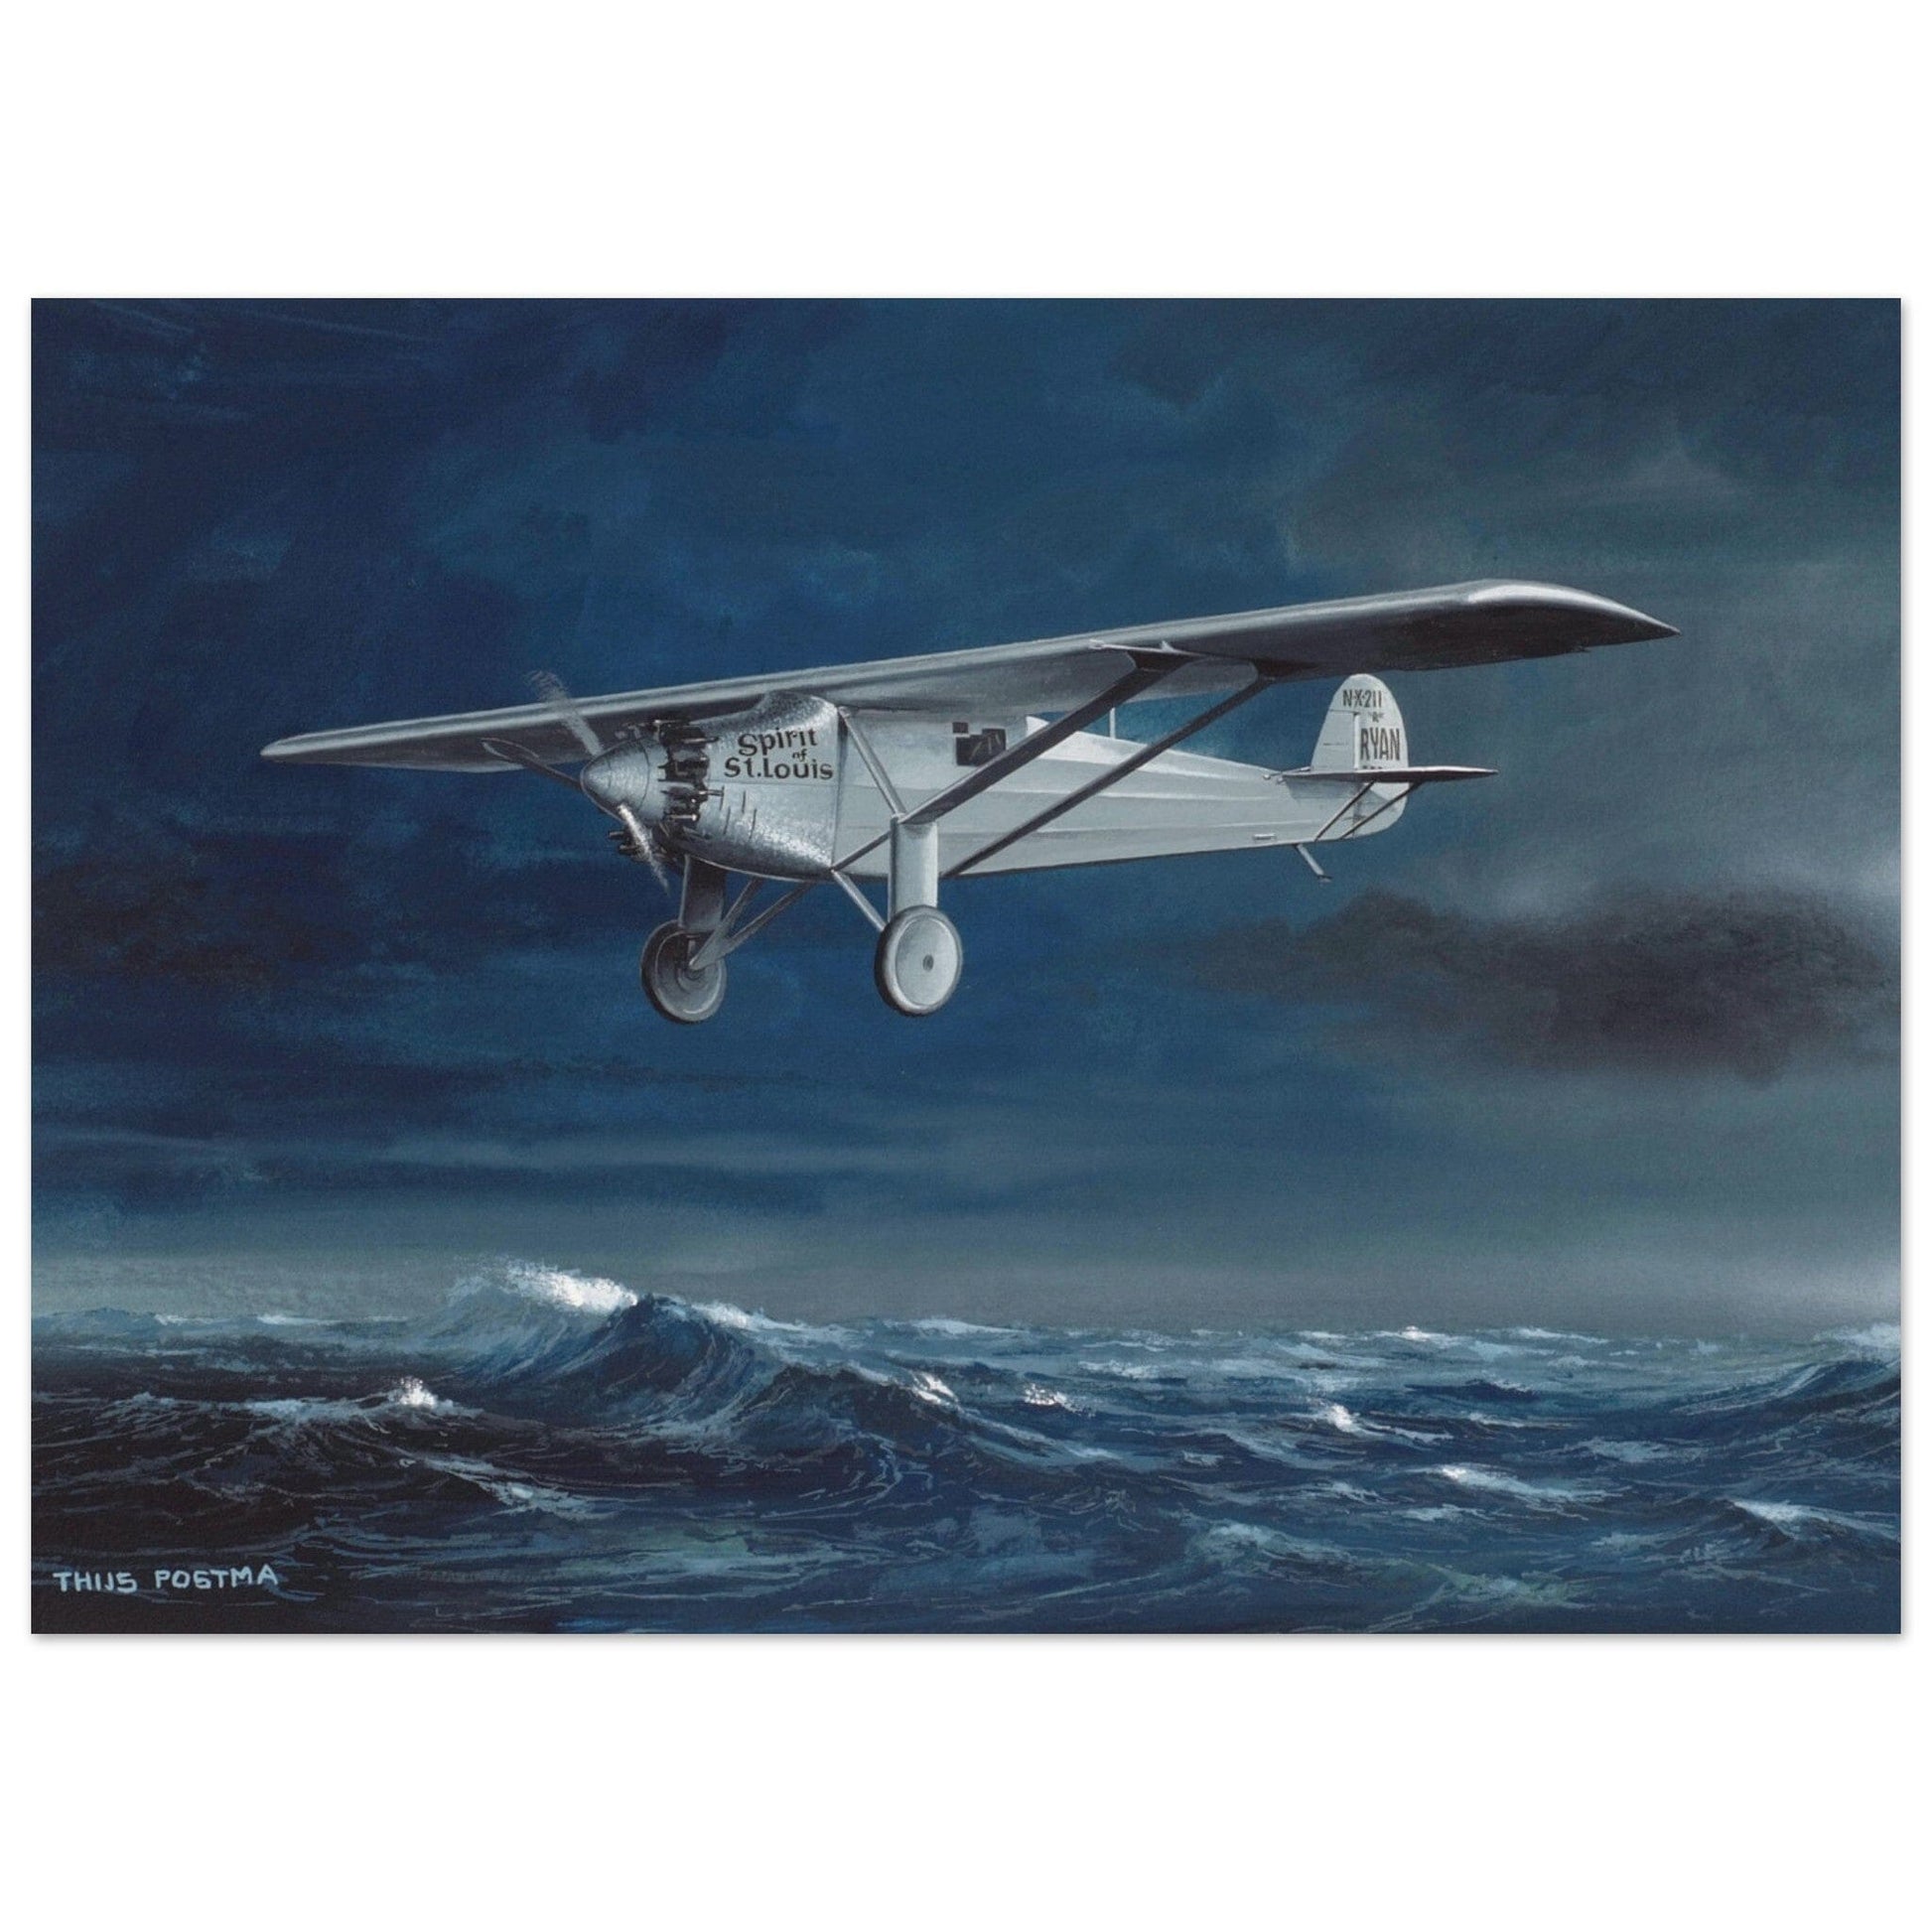 Thijs Postma - Poster - Charles Lindbergh Spirit of St. Louis 1927 Poster Only TP Aviation Art 50x70 cm / 20x28″ 